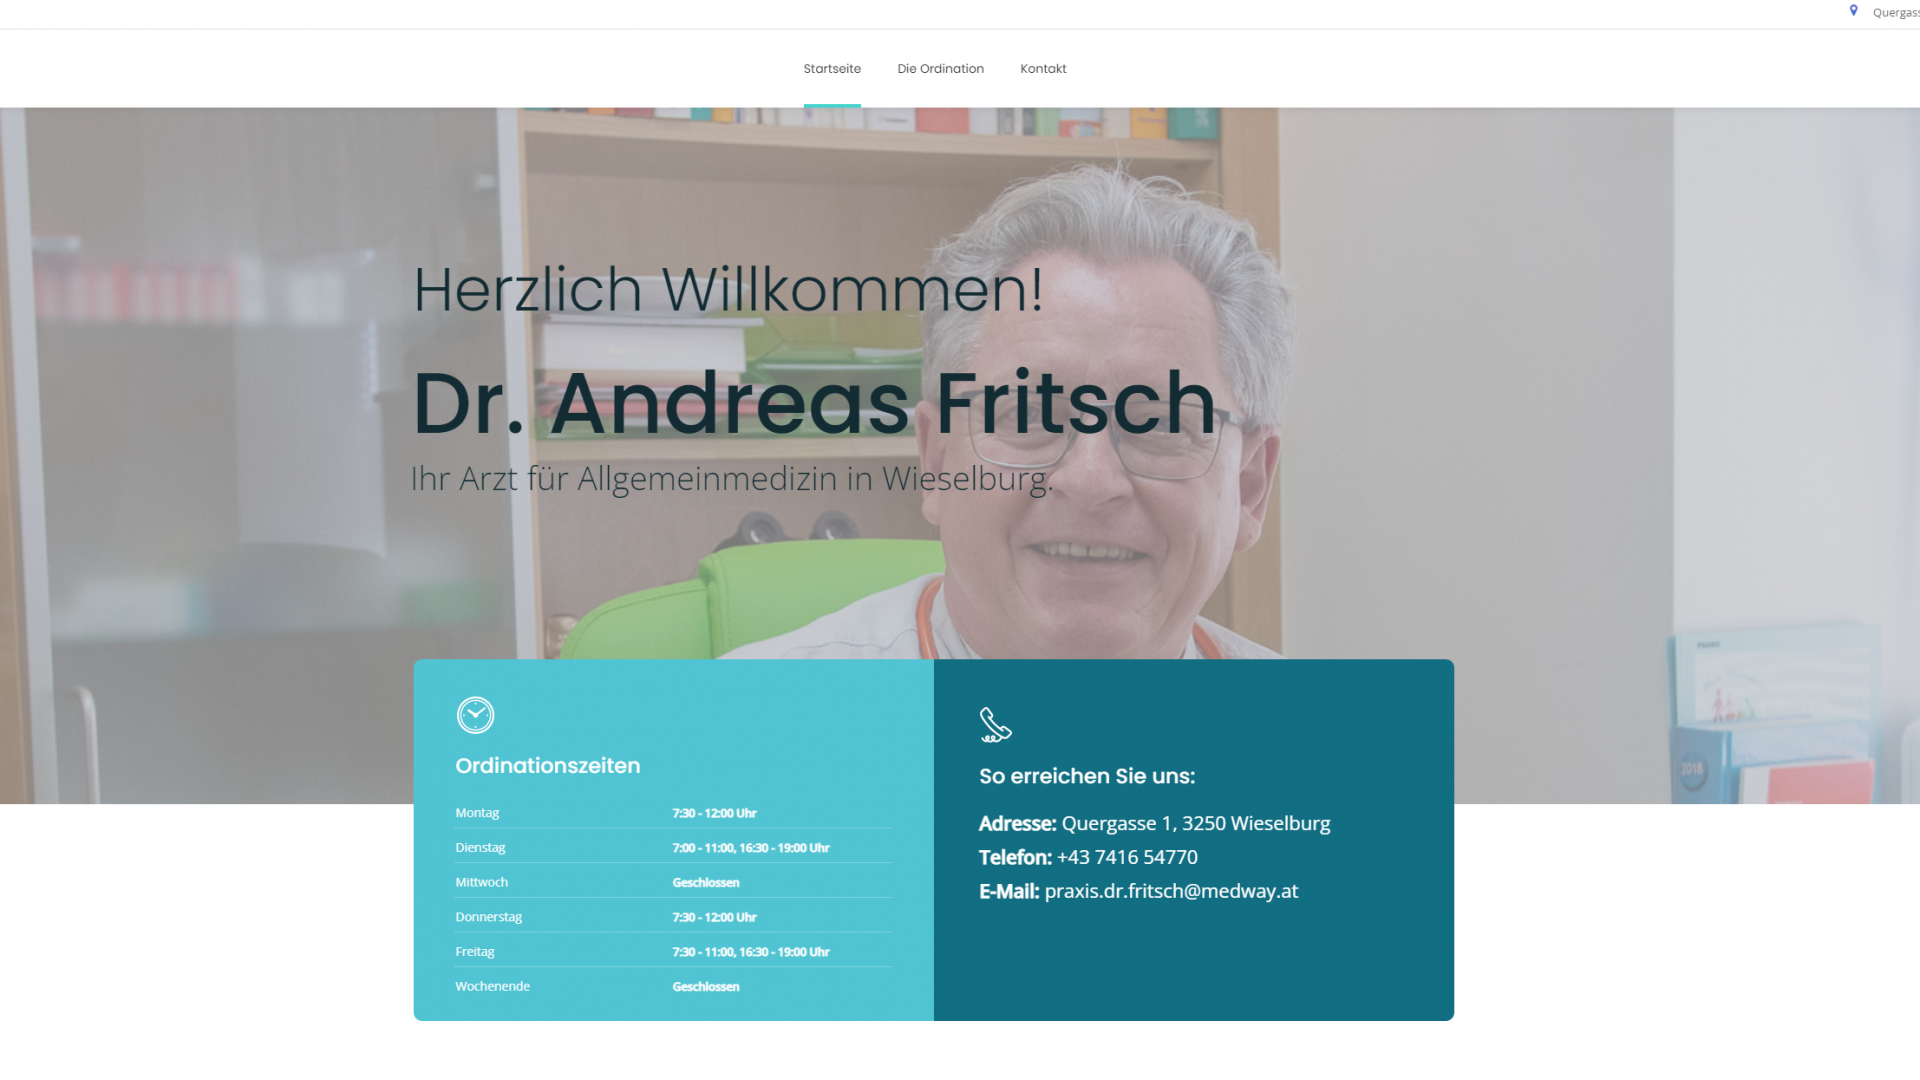 Dr. Andreas Fritsch